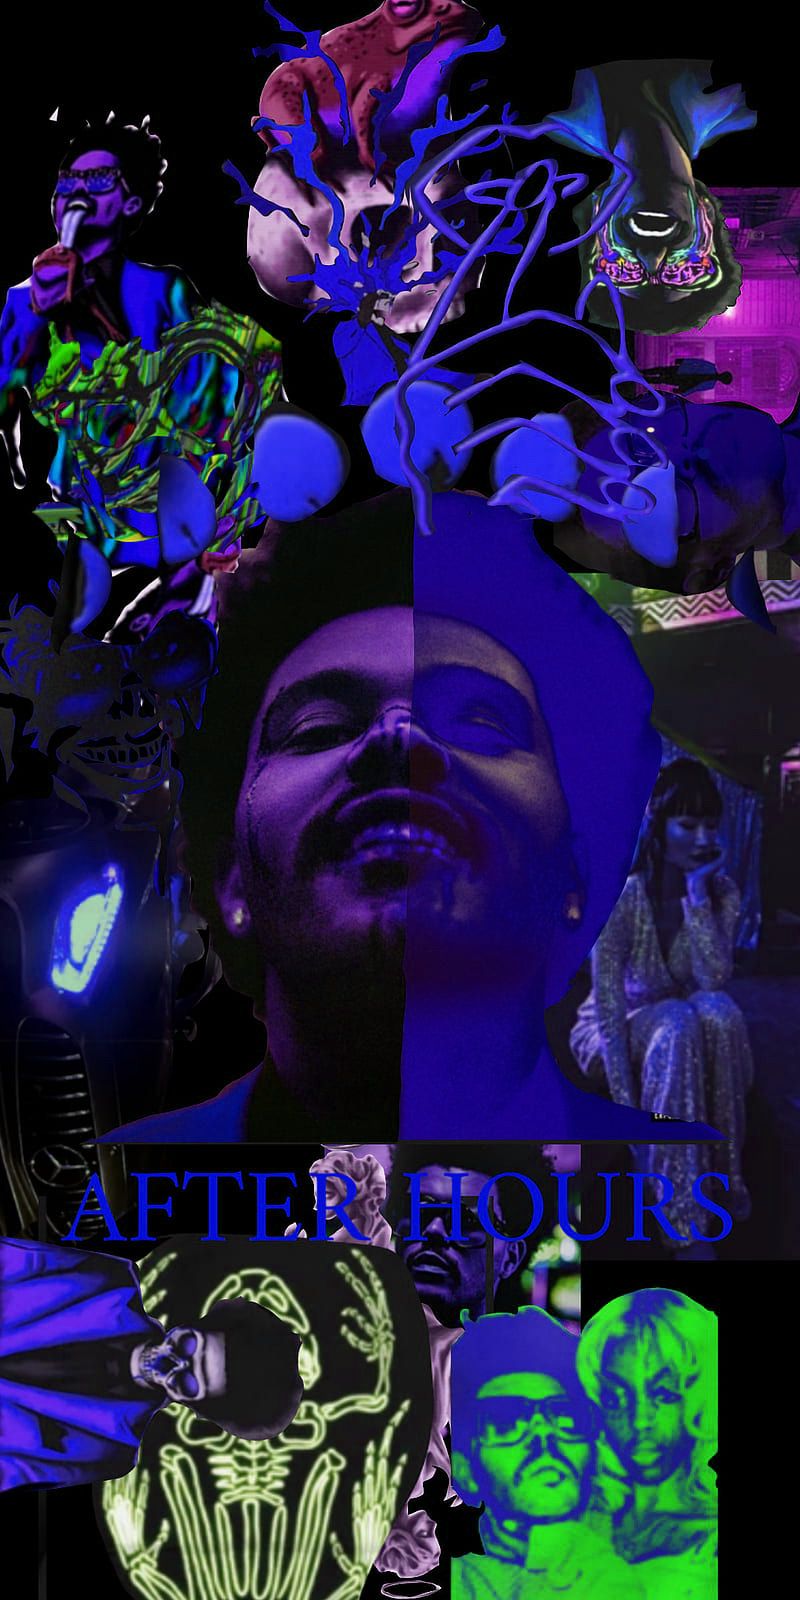 A picture of an after party poster - The Weeknd